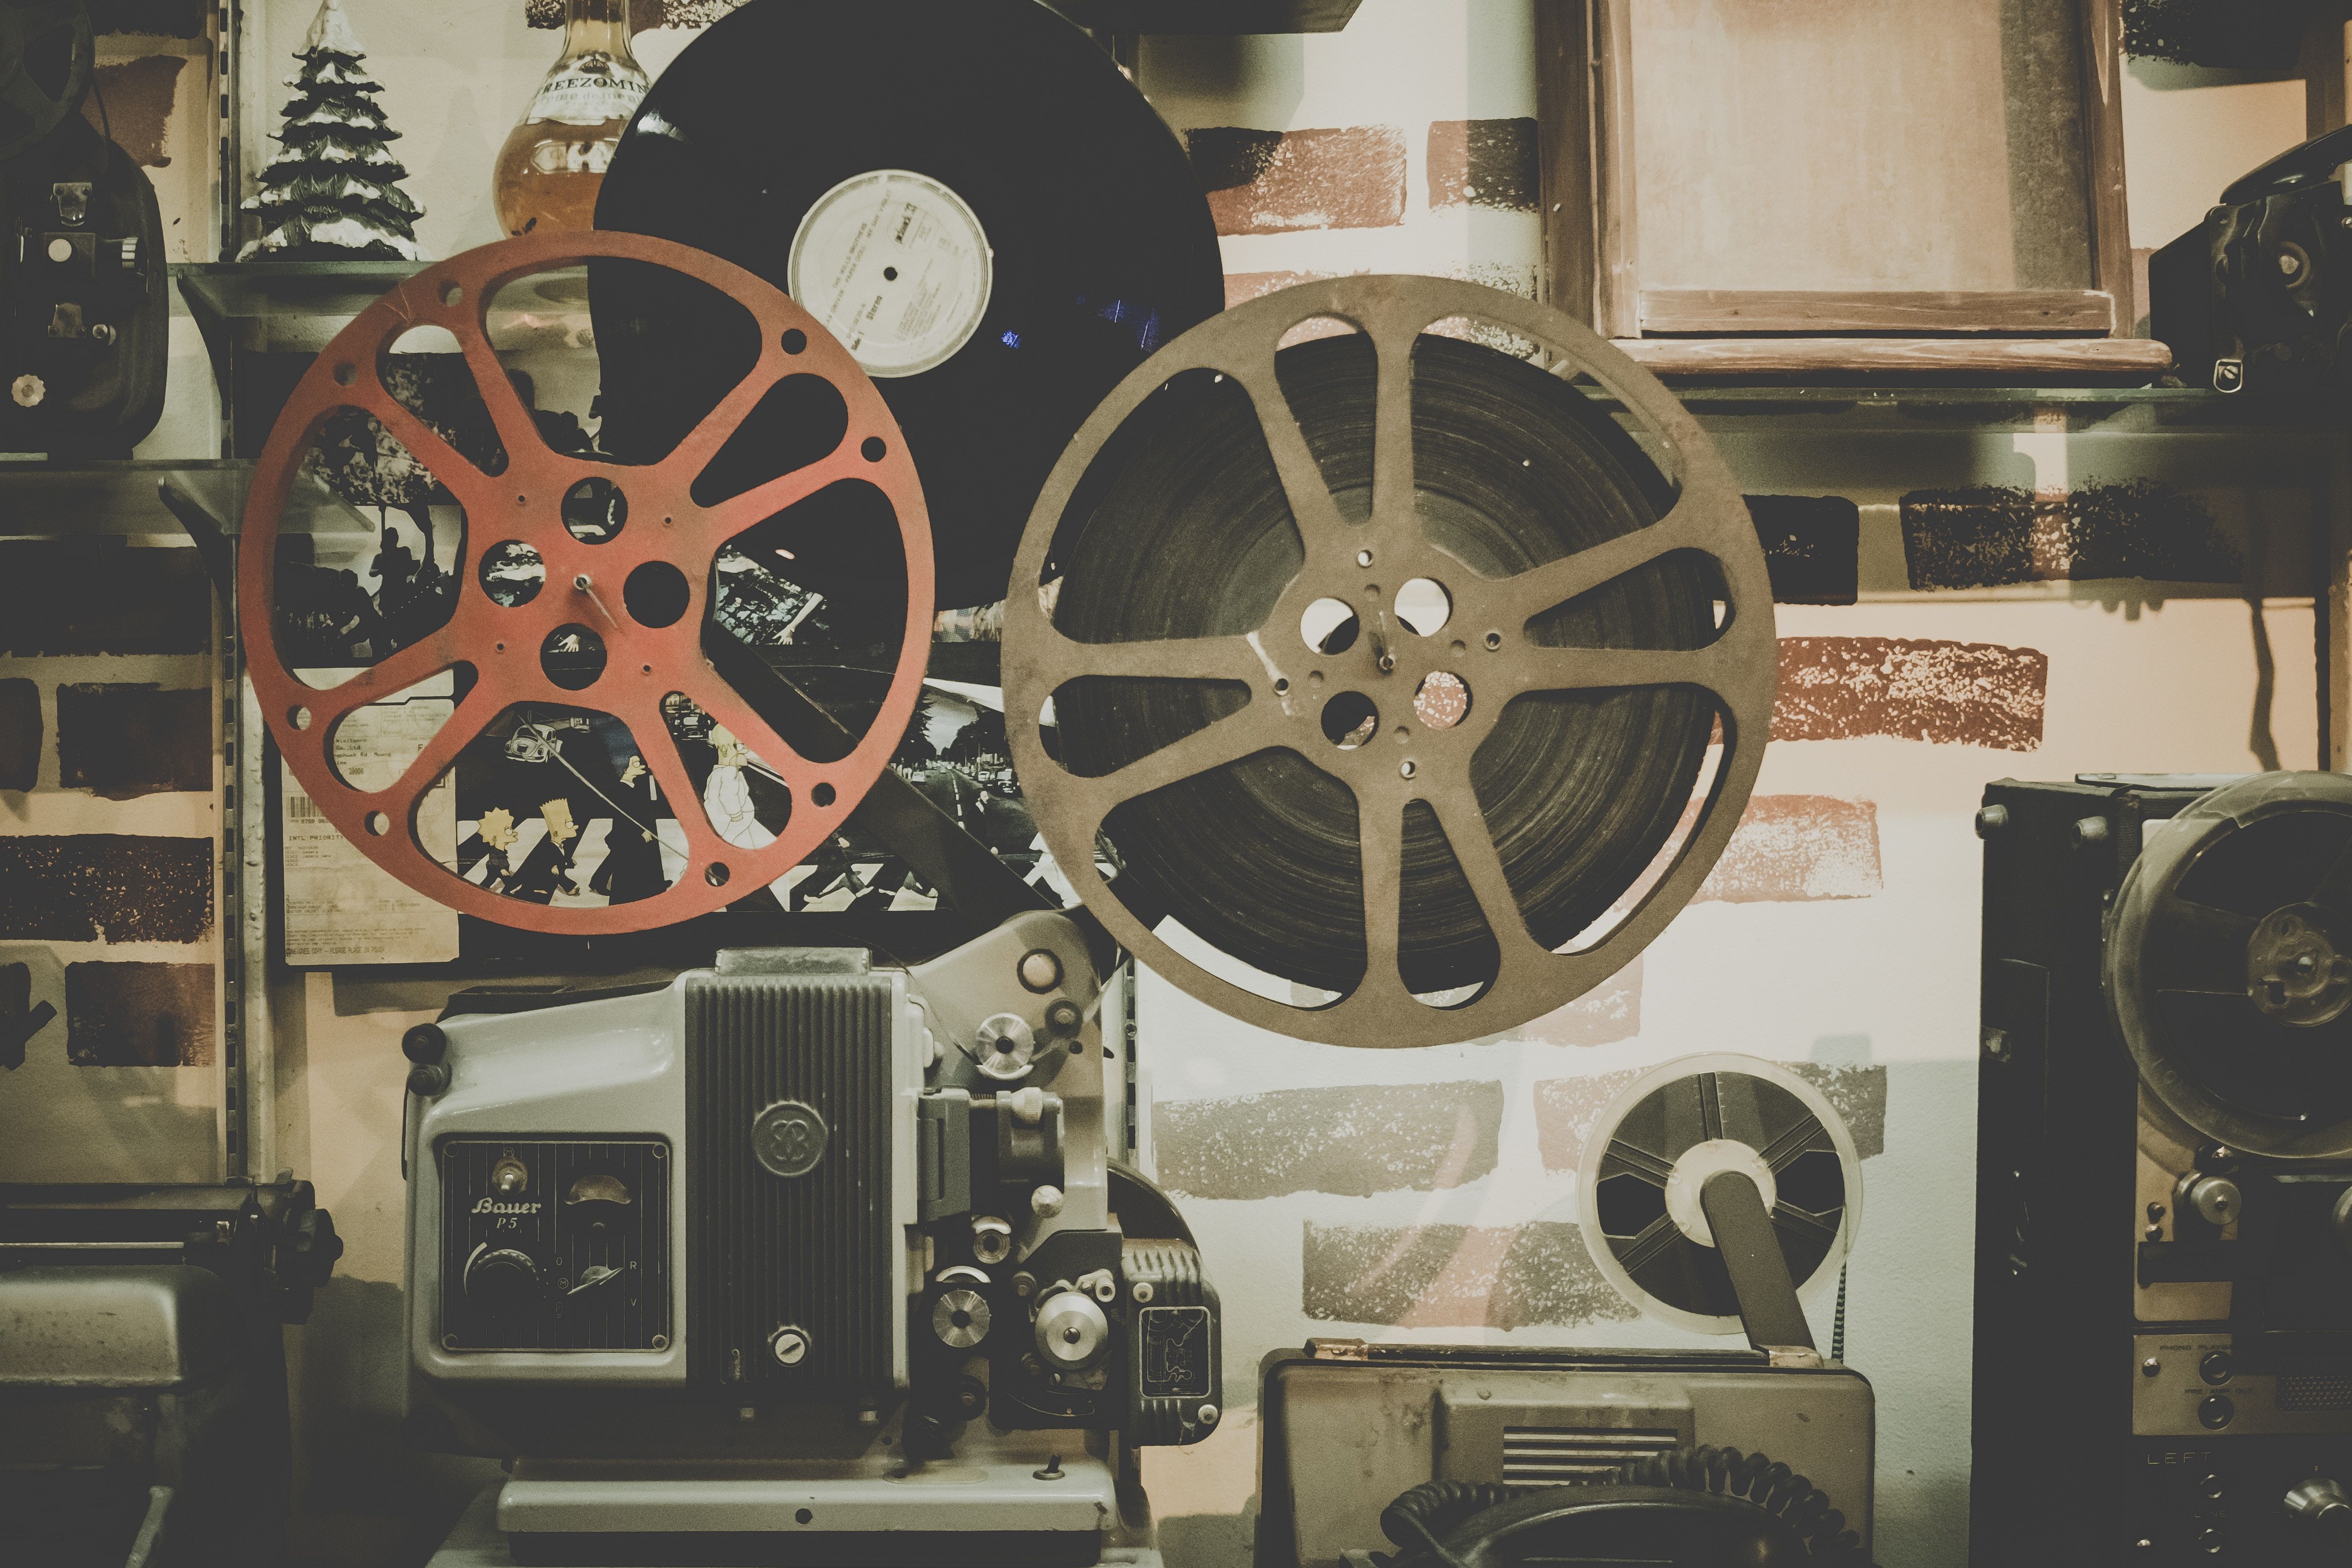 4896x3264 #technology, #antique, #projector, #vintage, #vinyl, #reel, #classic, #record, #tech, #movie, #film projector, #Creative Commons image, #old, #film, #symmetrical, #retro. Mocah HD Wallpaper